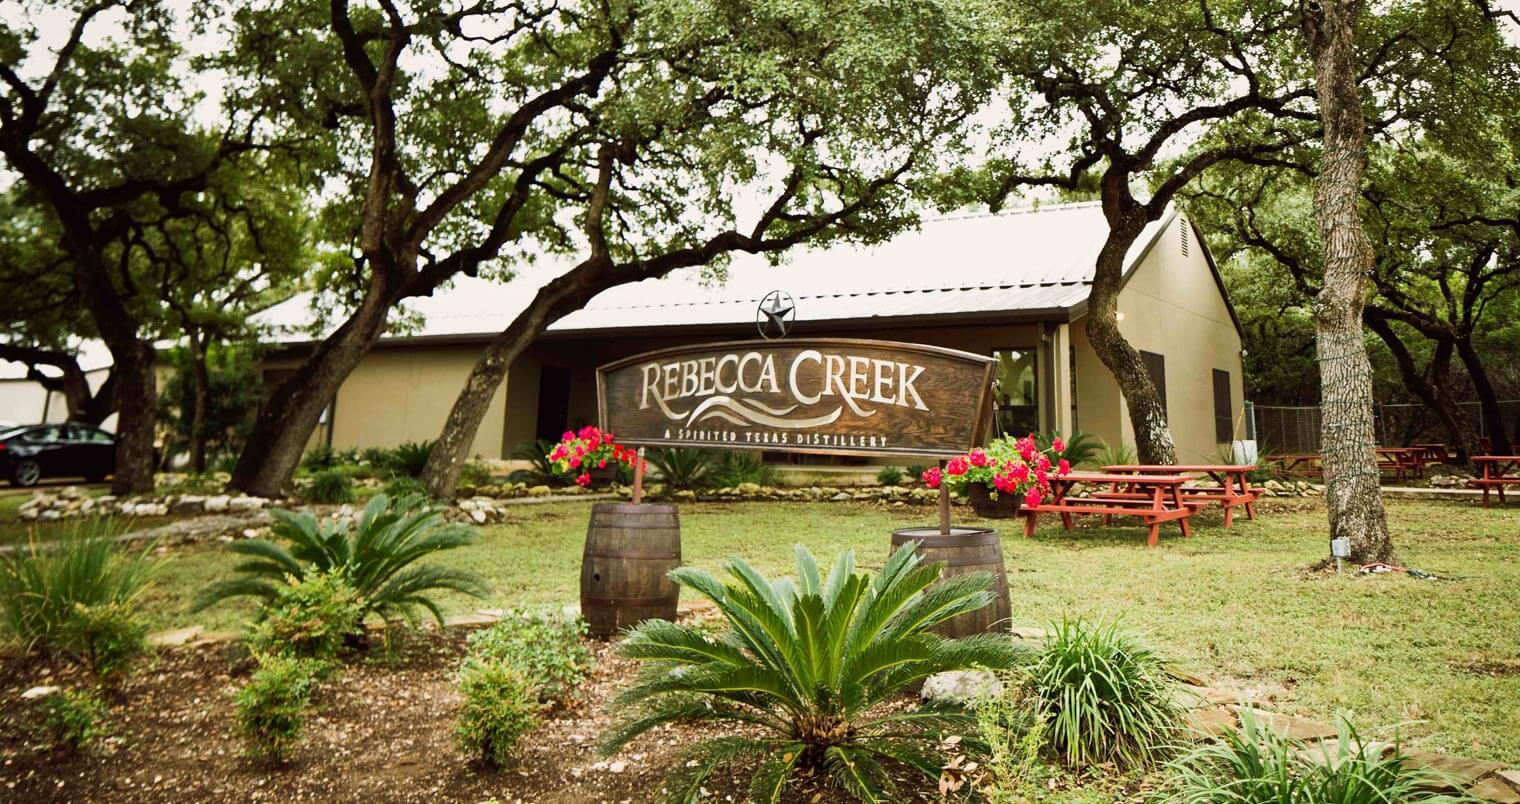 Rebecca Creek Distillery Tasting Room, outside front entrance, featured image